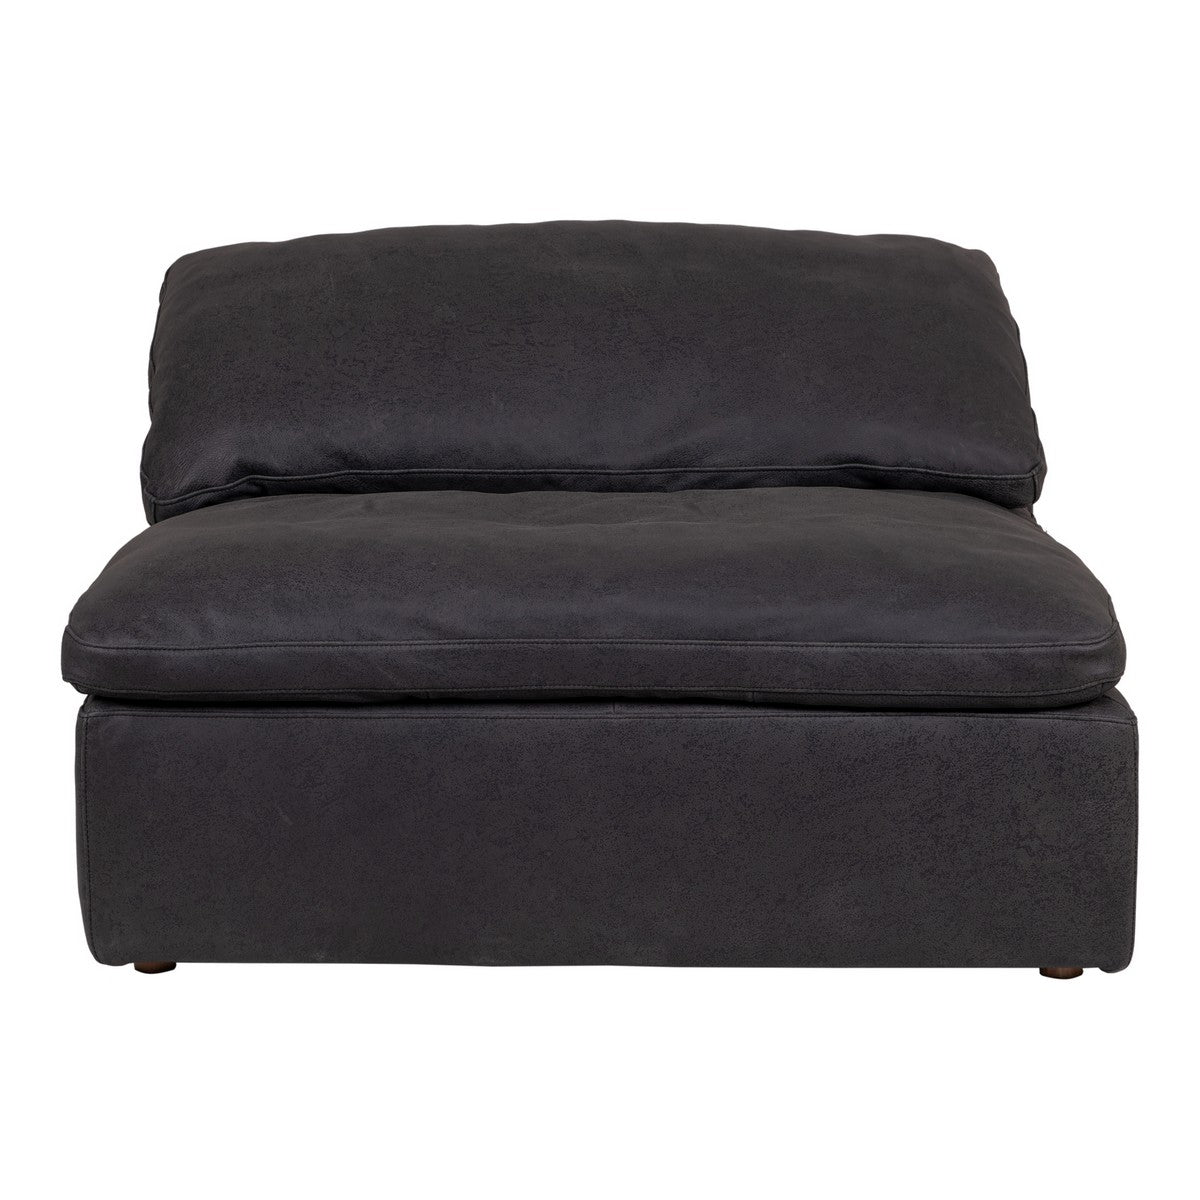 Moe's Home Collection Clay Slipper Chair Nubuck Leather Black - YJ-1005-02 - Moe's Home Collection - Slipper Chairs - Minimal And Modern - 1